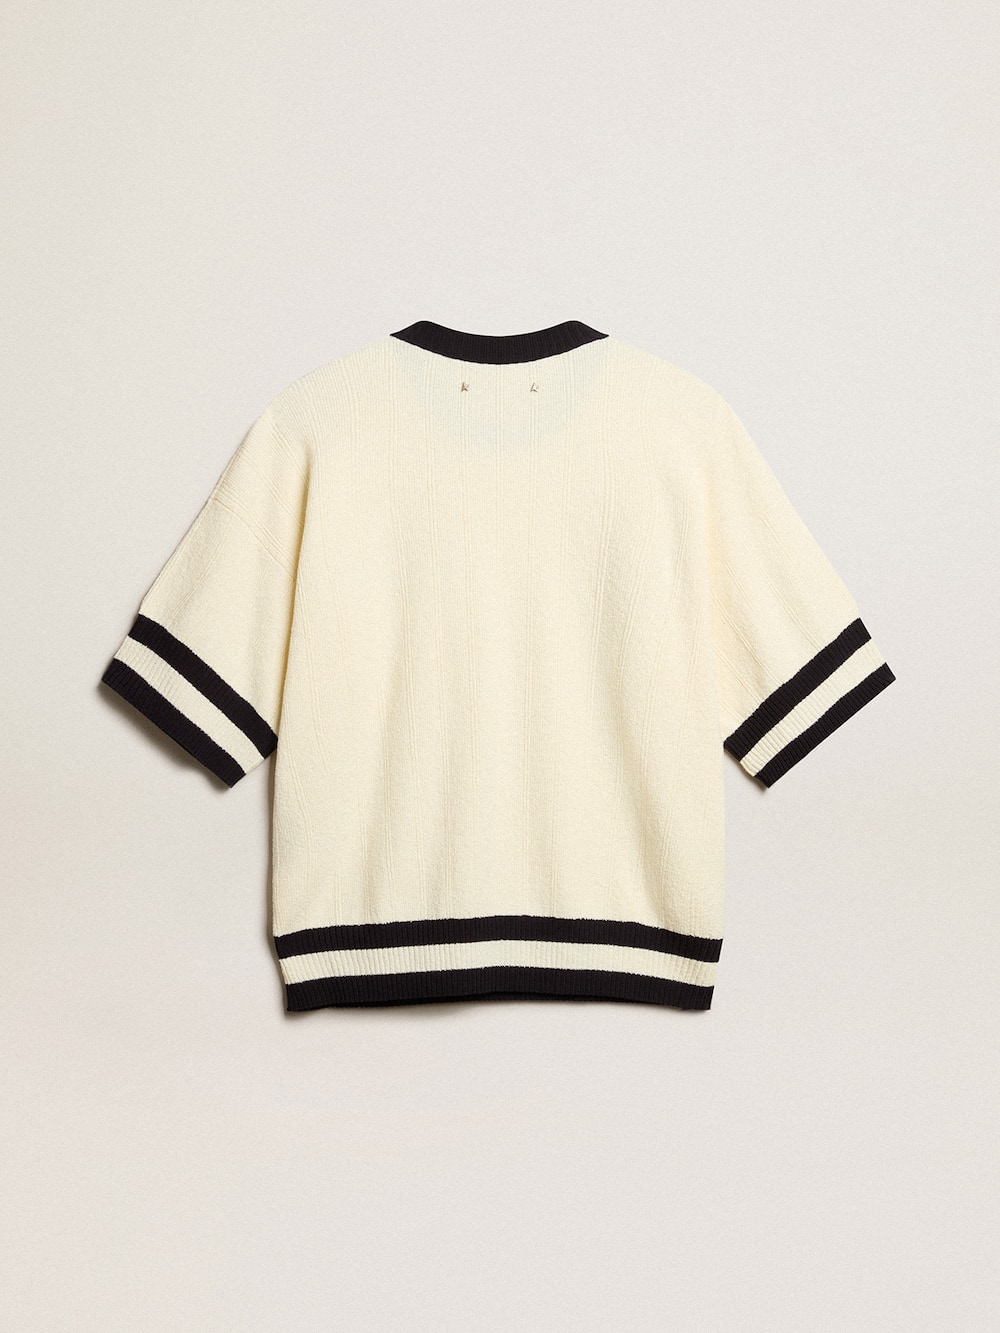 Golden Goose - Women's short-sleeved sweater in vintage white with blue rib knit in 